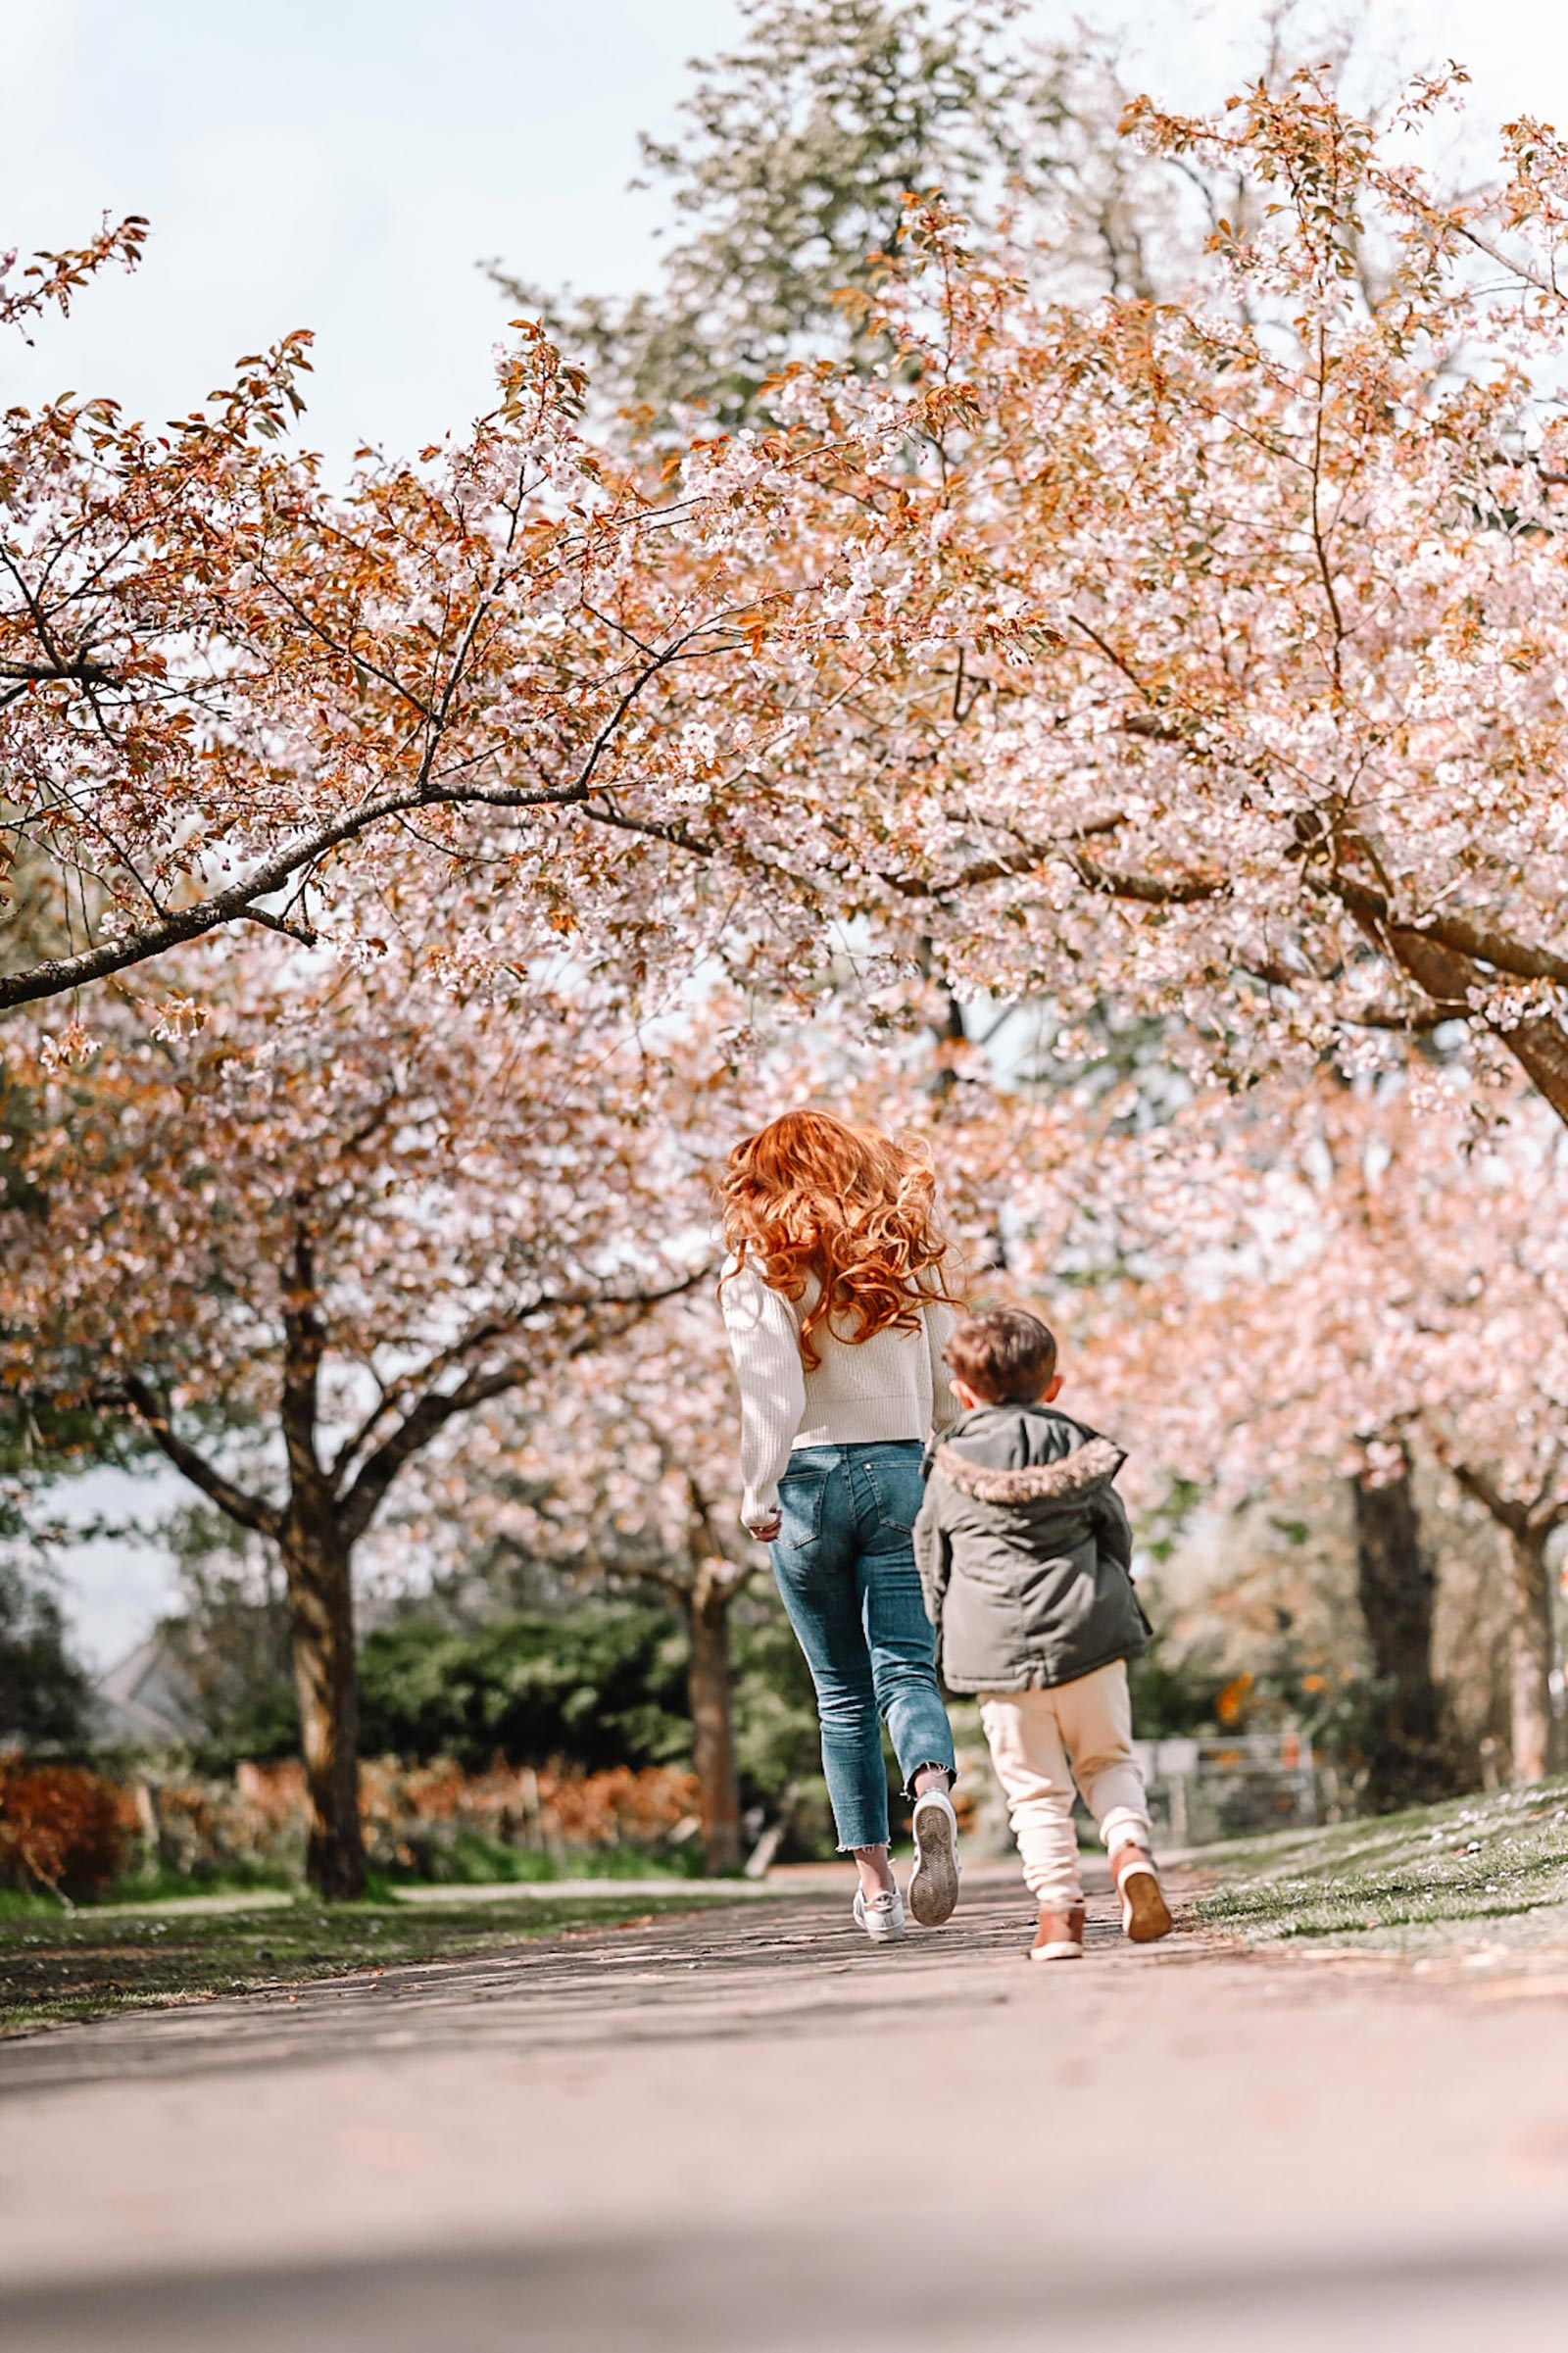 Amber and Max running through the cherry blossom trees in Edinburgh, spring 2021